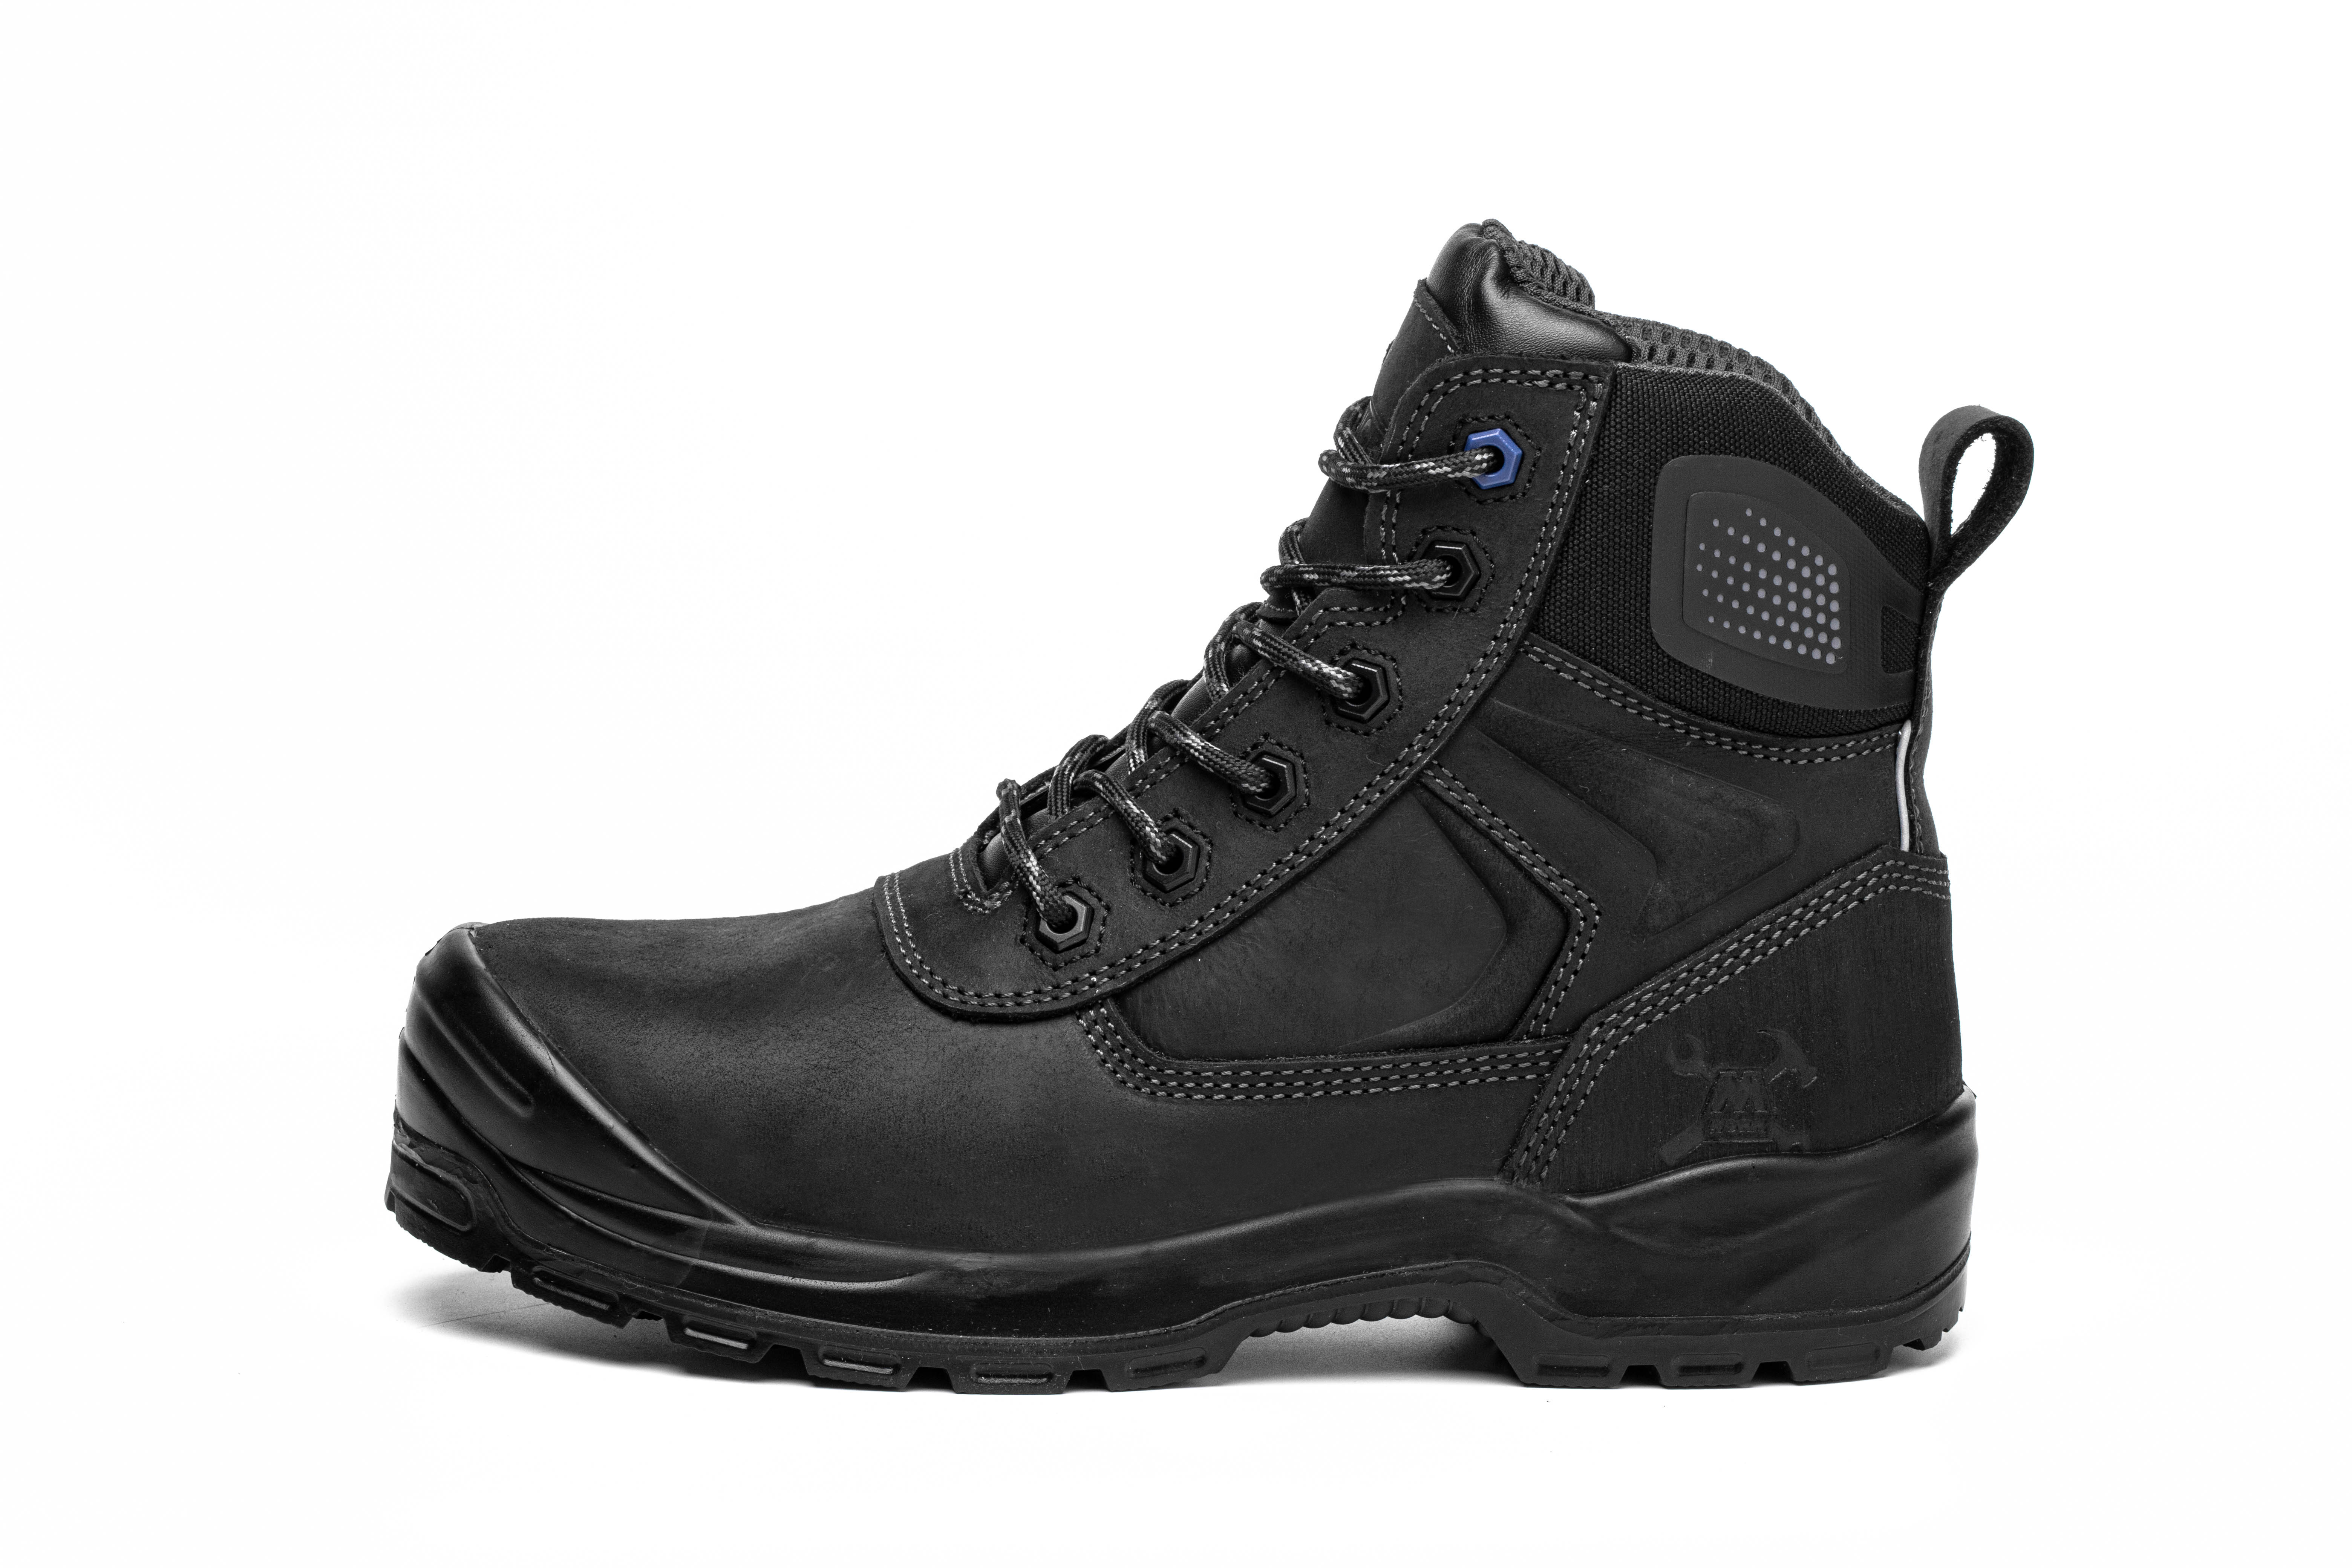 6 IN. Black Thor Composite toe&Plate Water Resistant No Metal Work Boot